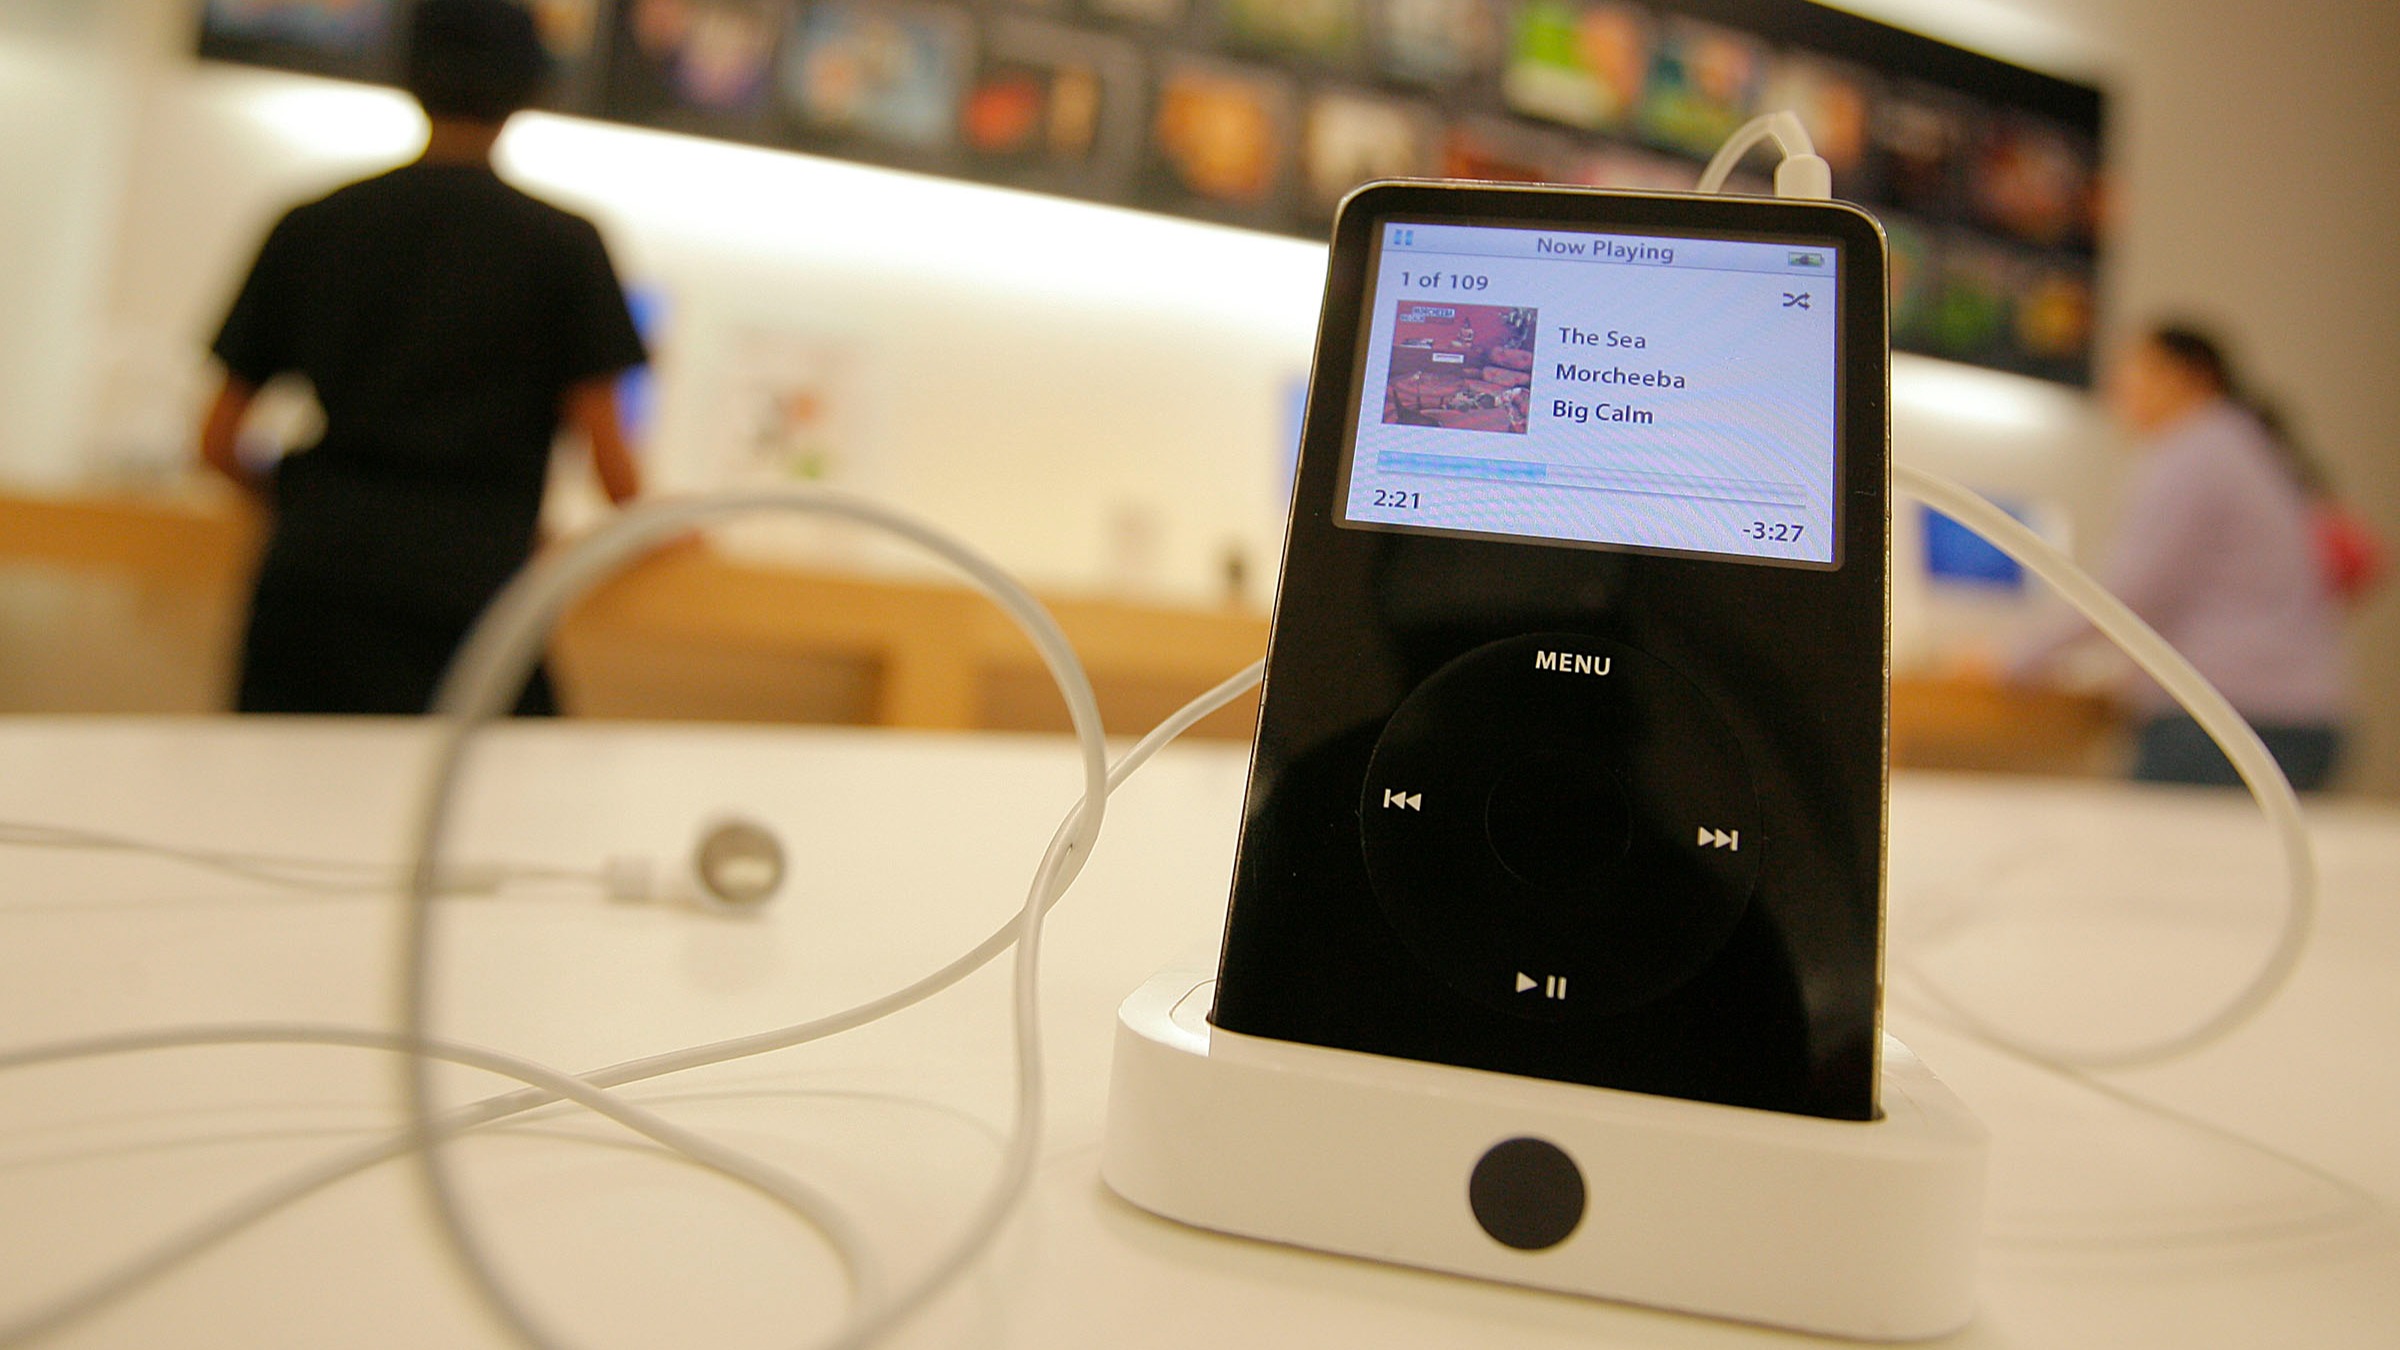 RIP iPod: A look back at the handheld music player that changed